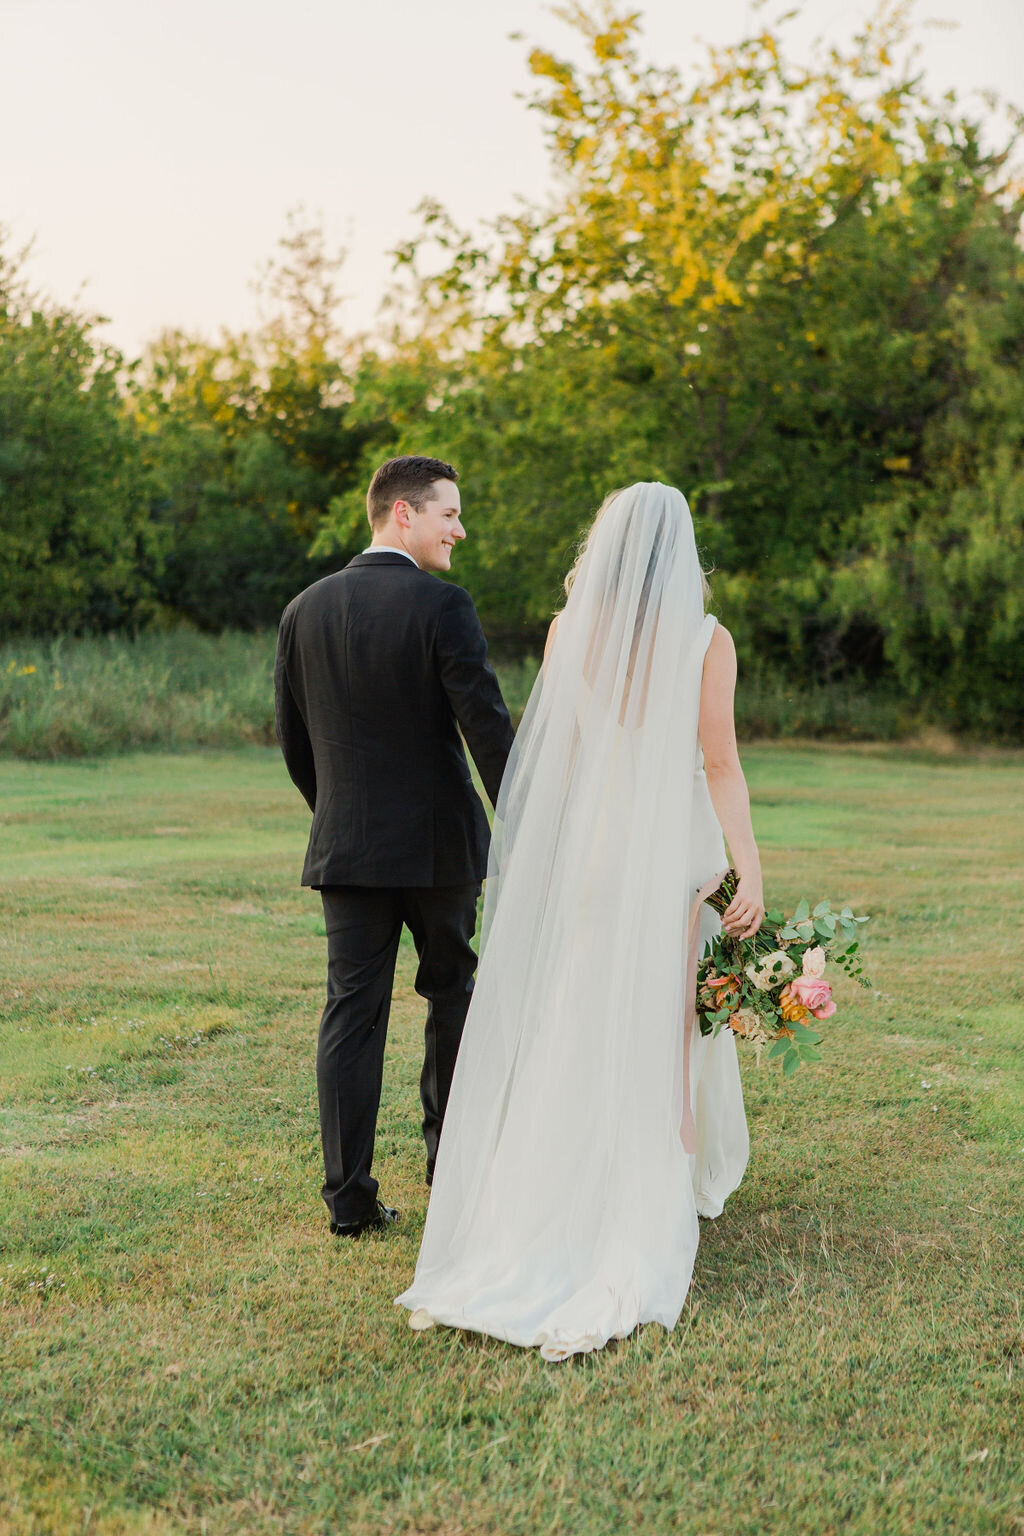 Bride and Groom Portraits by Kate Pease with Florals by Vella Nest Floral Design